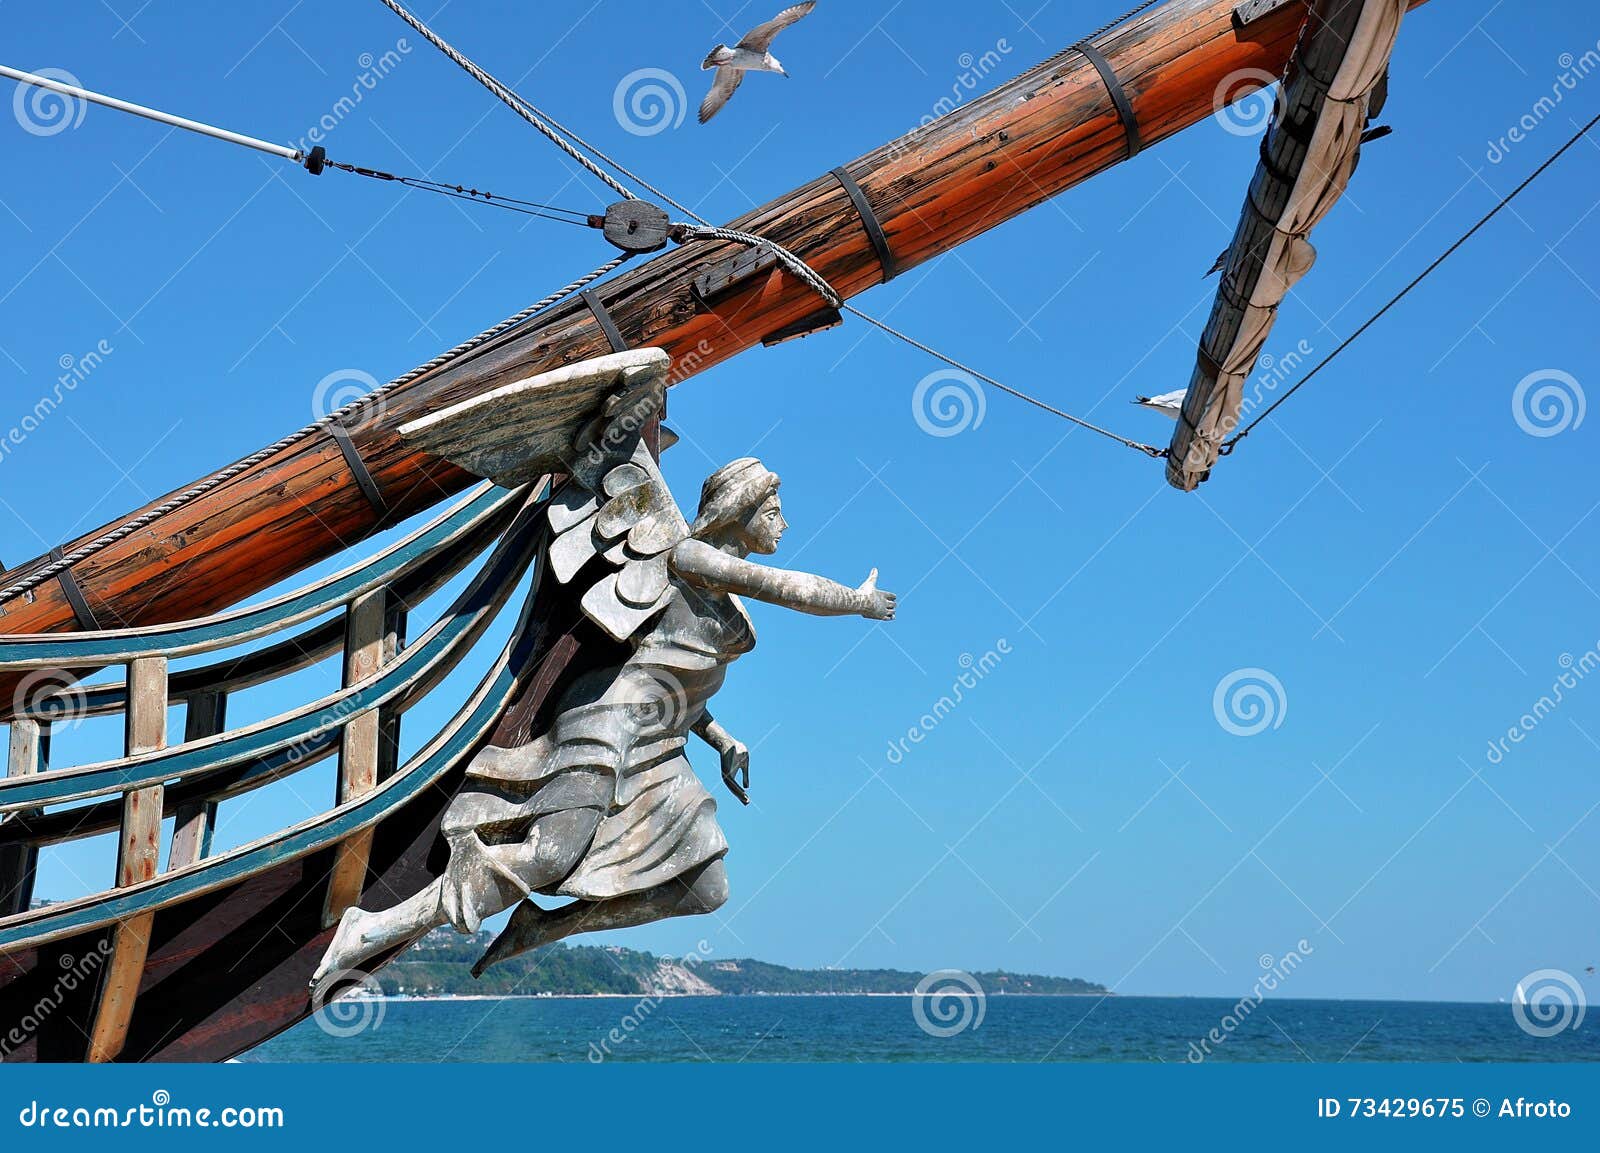 Statue On The Bow Of A Ship Stock Photo - Image: 73429675